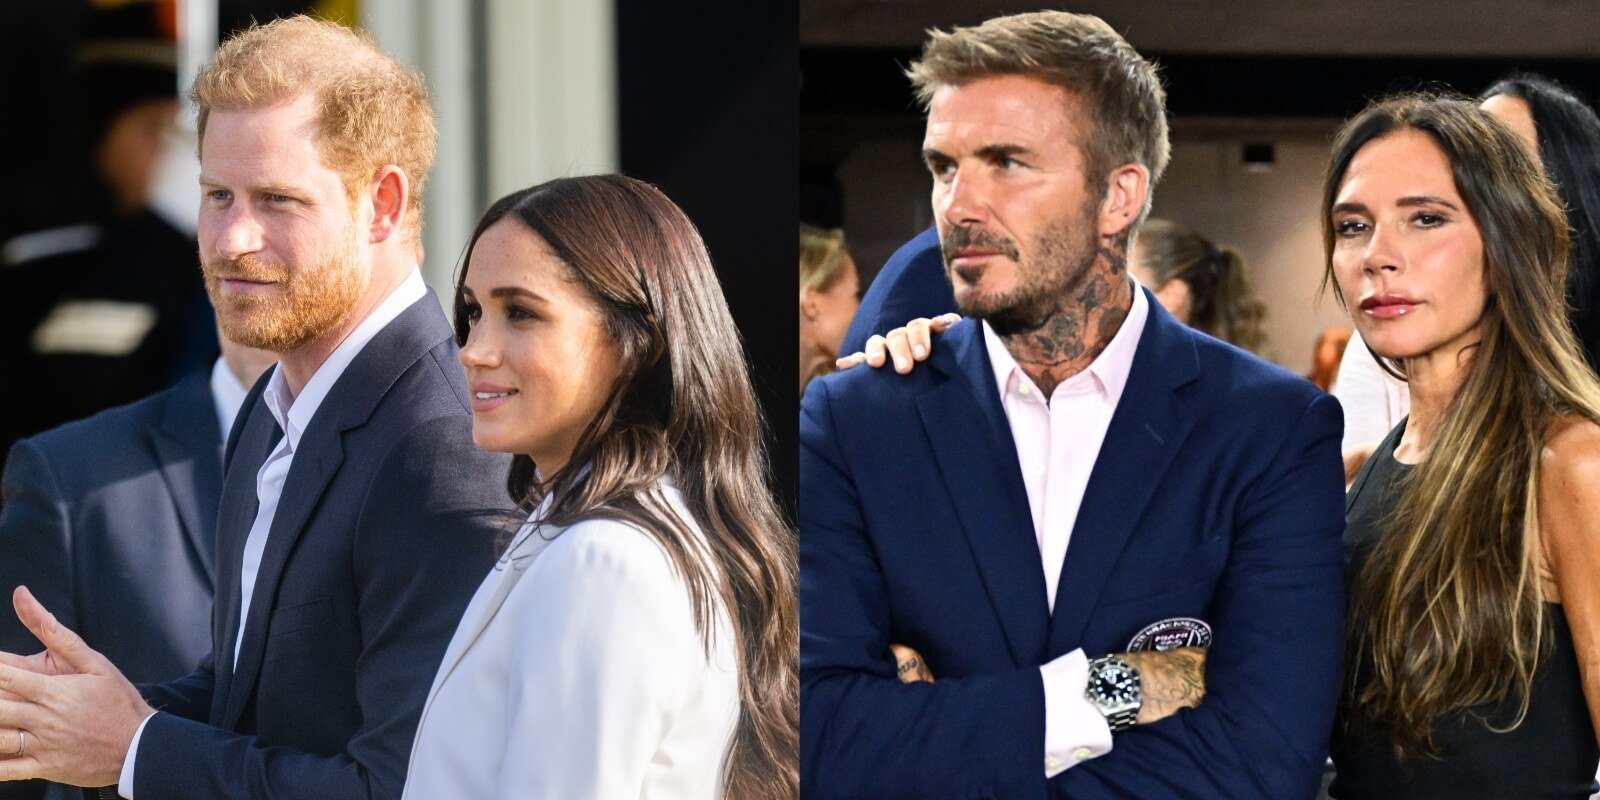 Prince Harry, Meghan Markle, David and Victoria Beckham in side-by-side photographs.